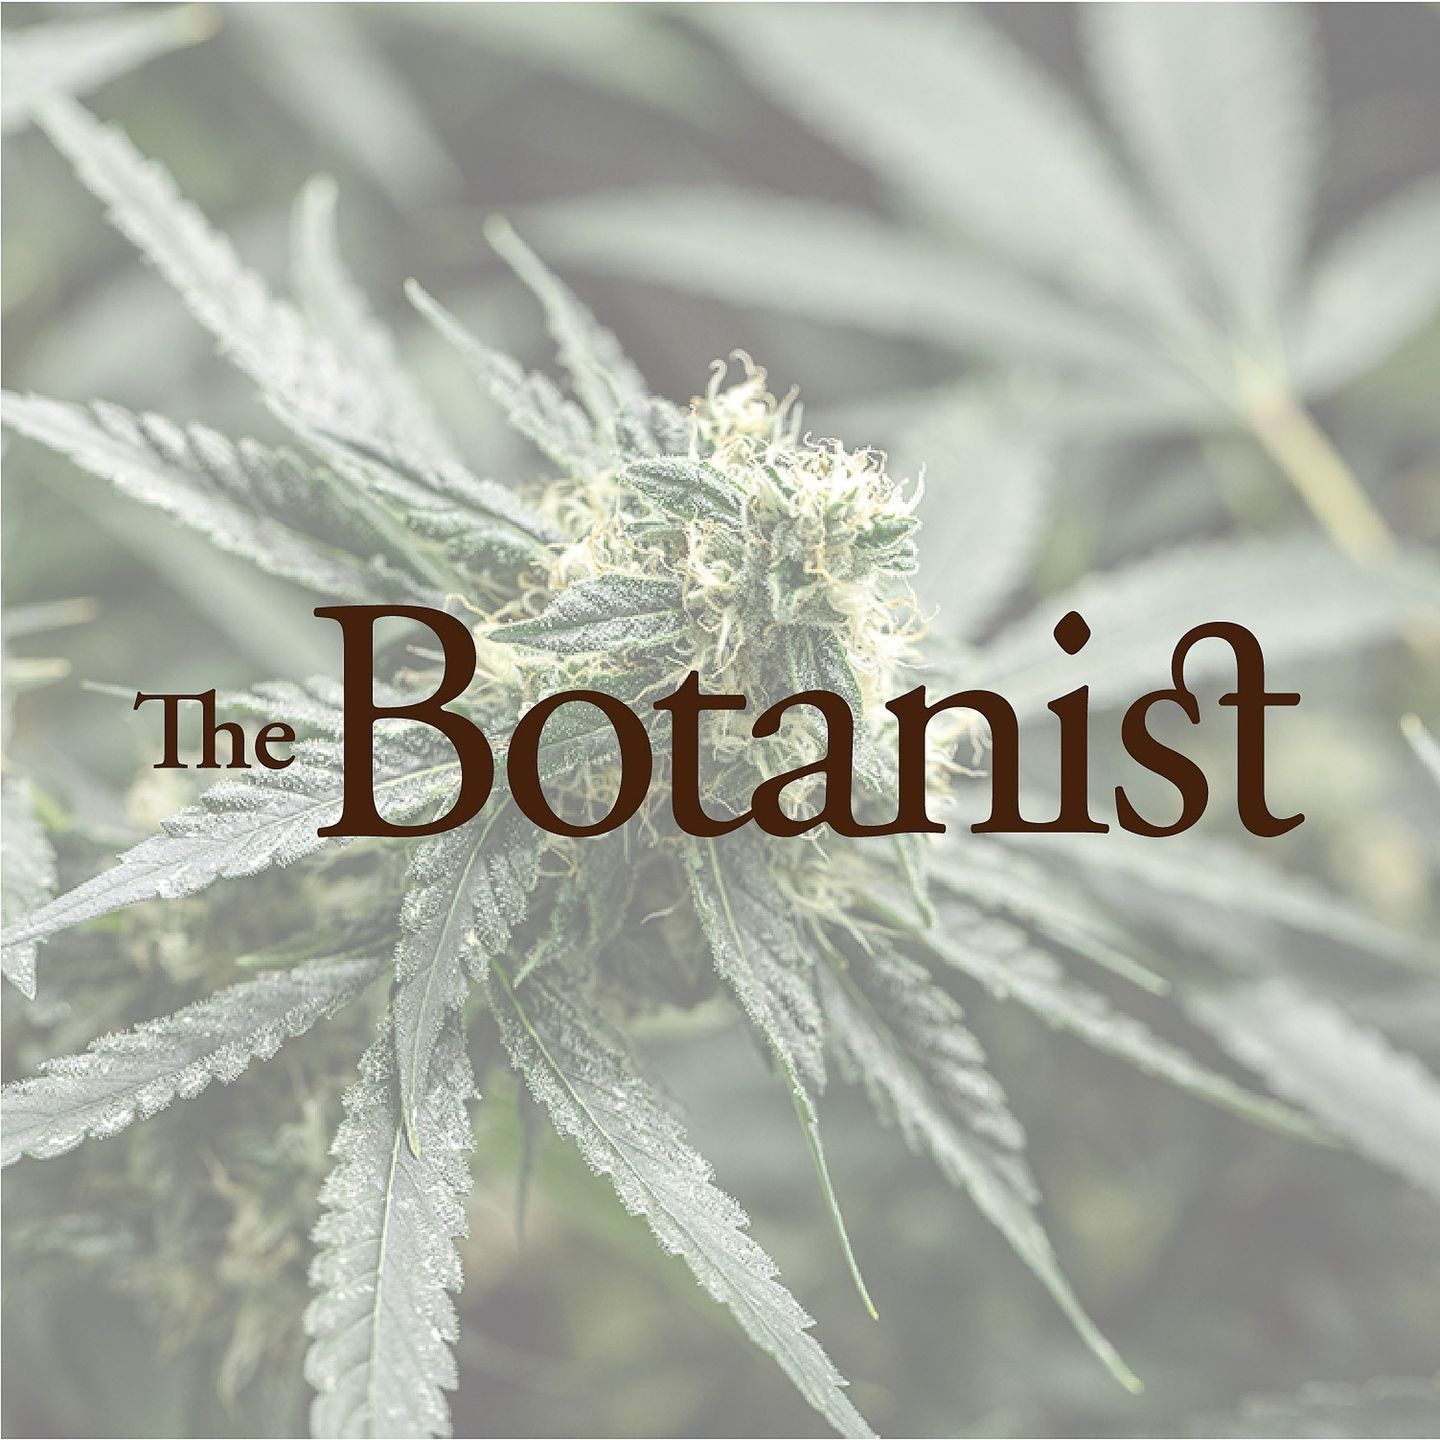 image feature The Botanist - Egg Harbor Township